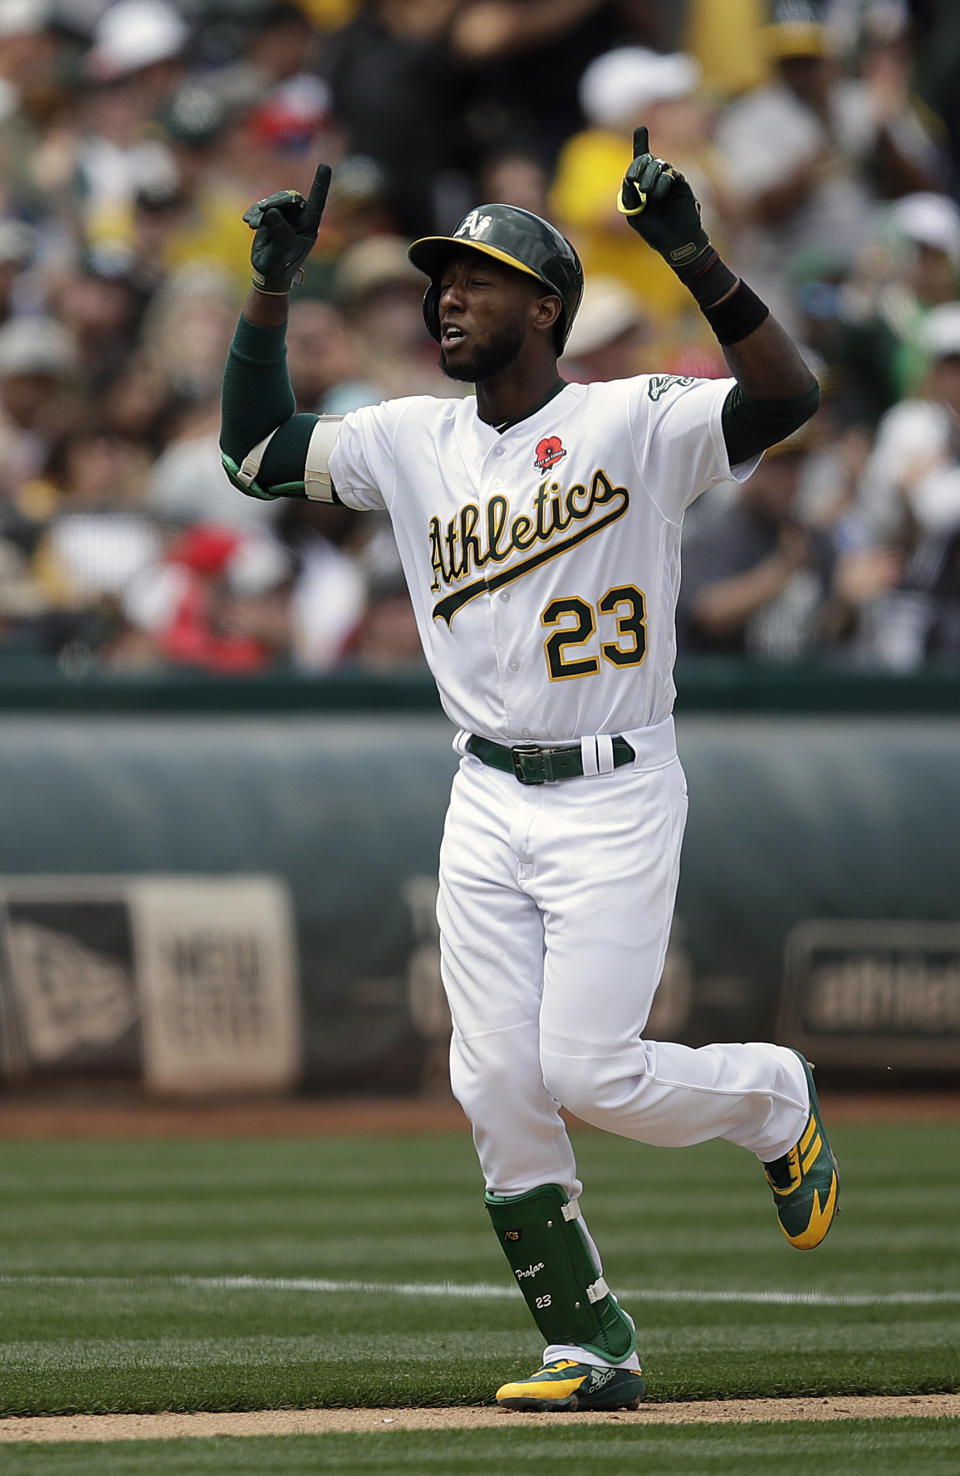 Oakland Athletics' Jurickson Profar celebrates after hitting a two-run home run off Los Angeles Angels' Trevor Cahill in the fourth inning of a baseball game Monday, May 27, 2019, in Oakland, Calif. (AP Photo/Ben Margot)